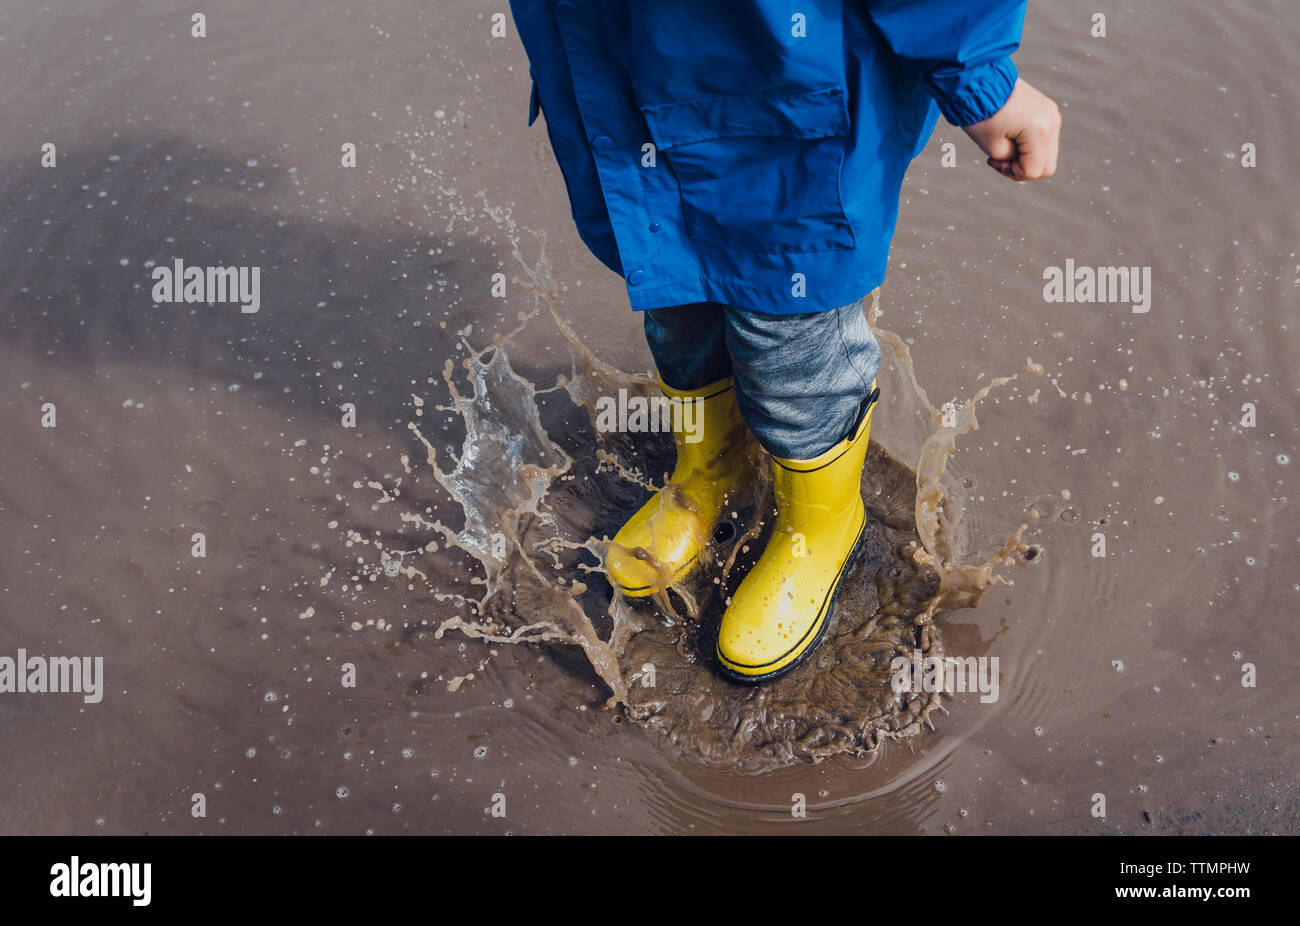 Low section of playful boy wearing yellow rubber boots while splashing puddle Stock Photo